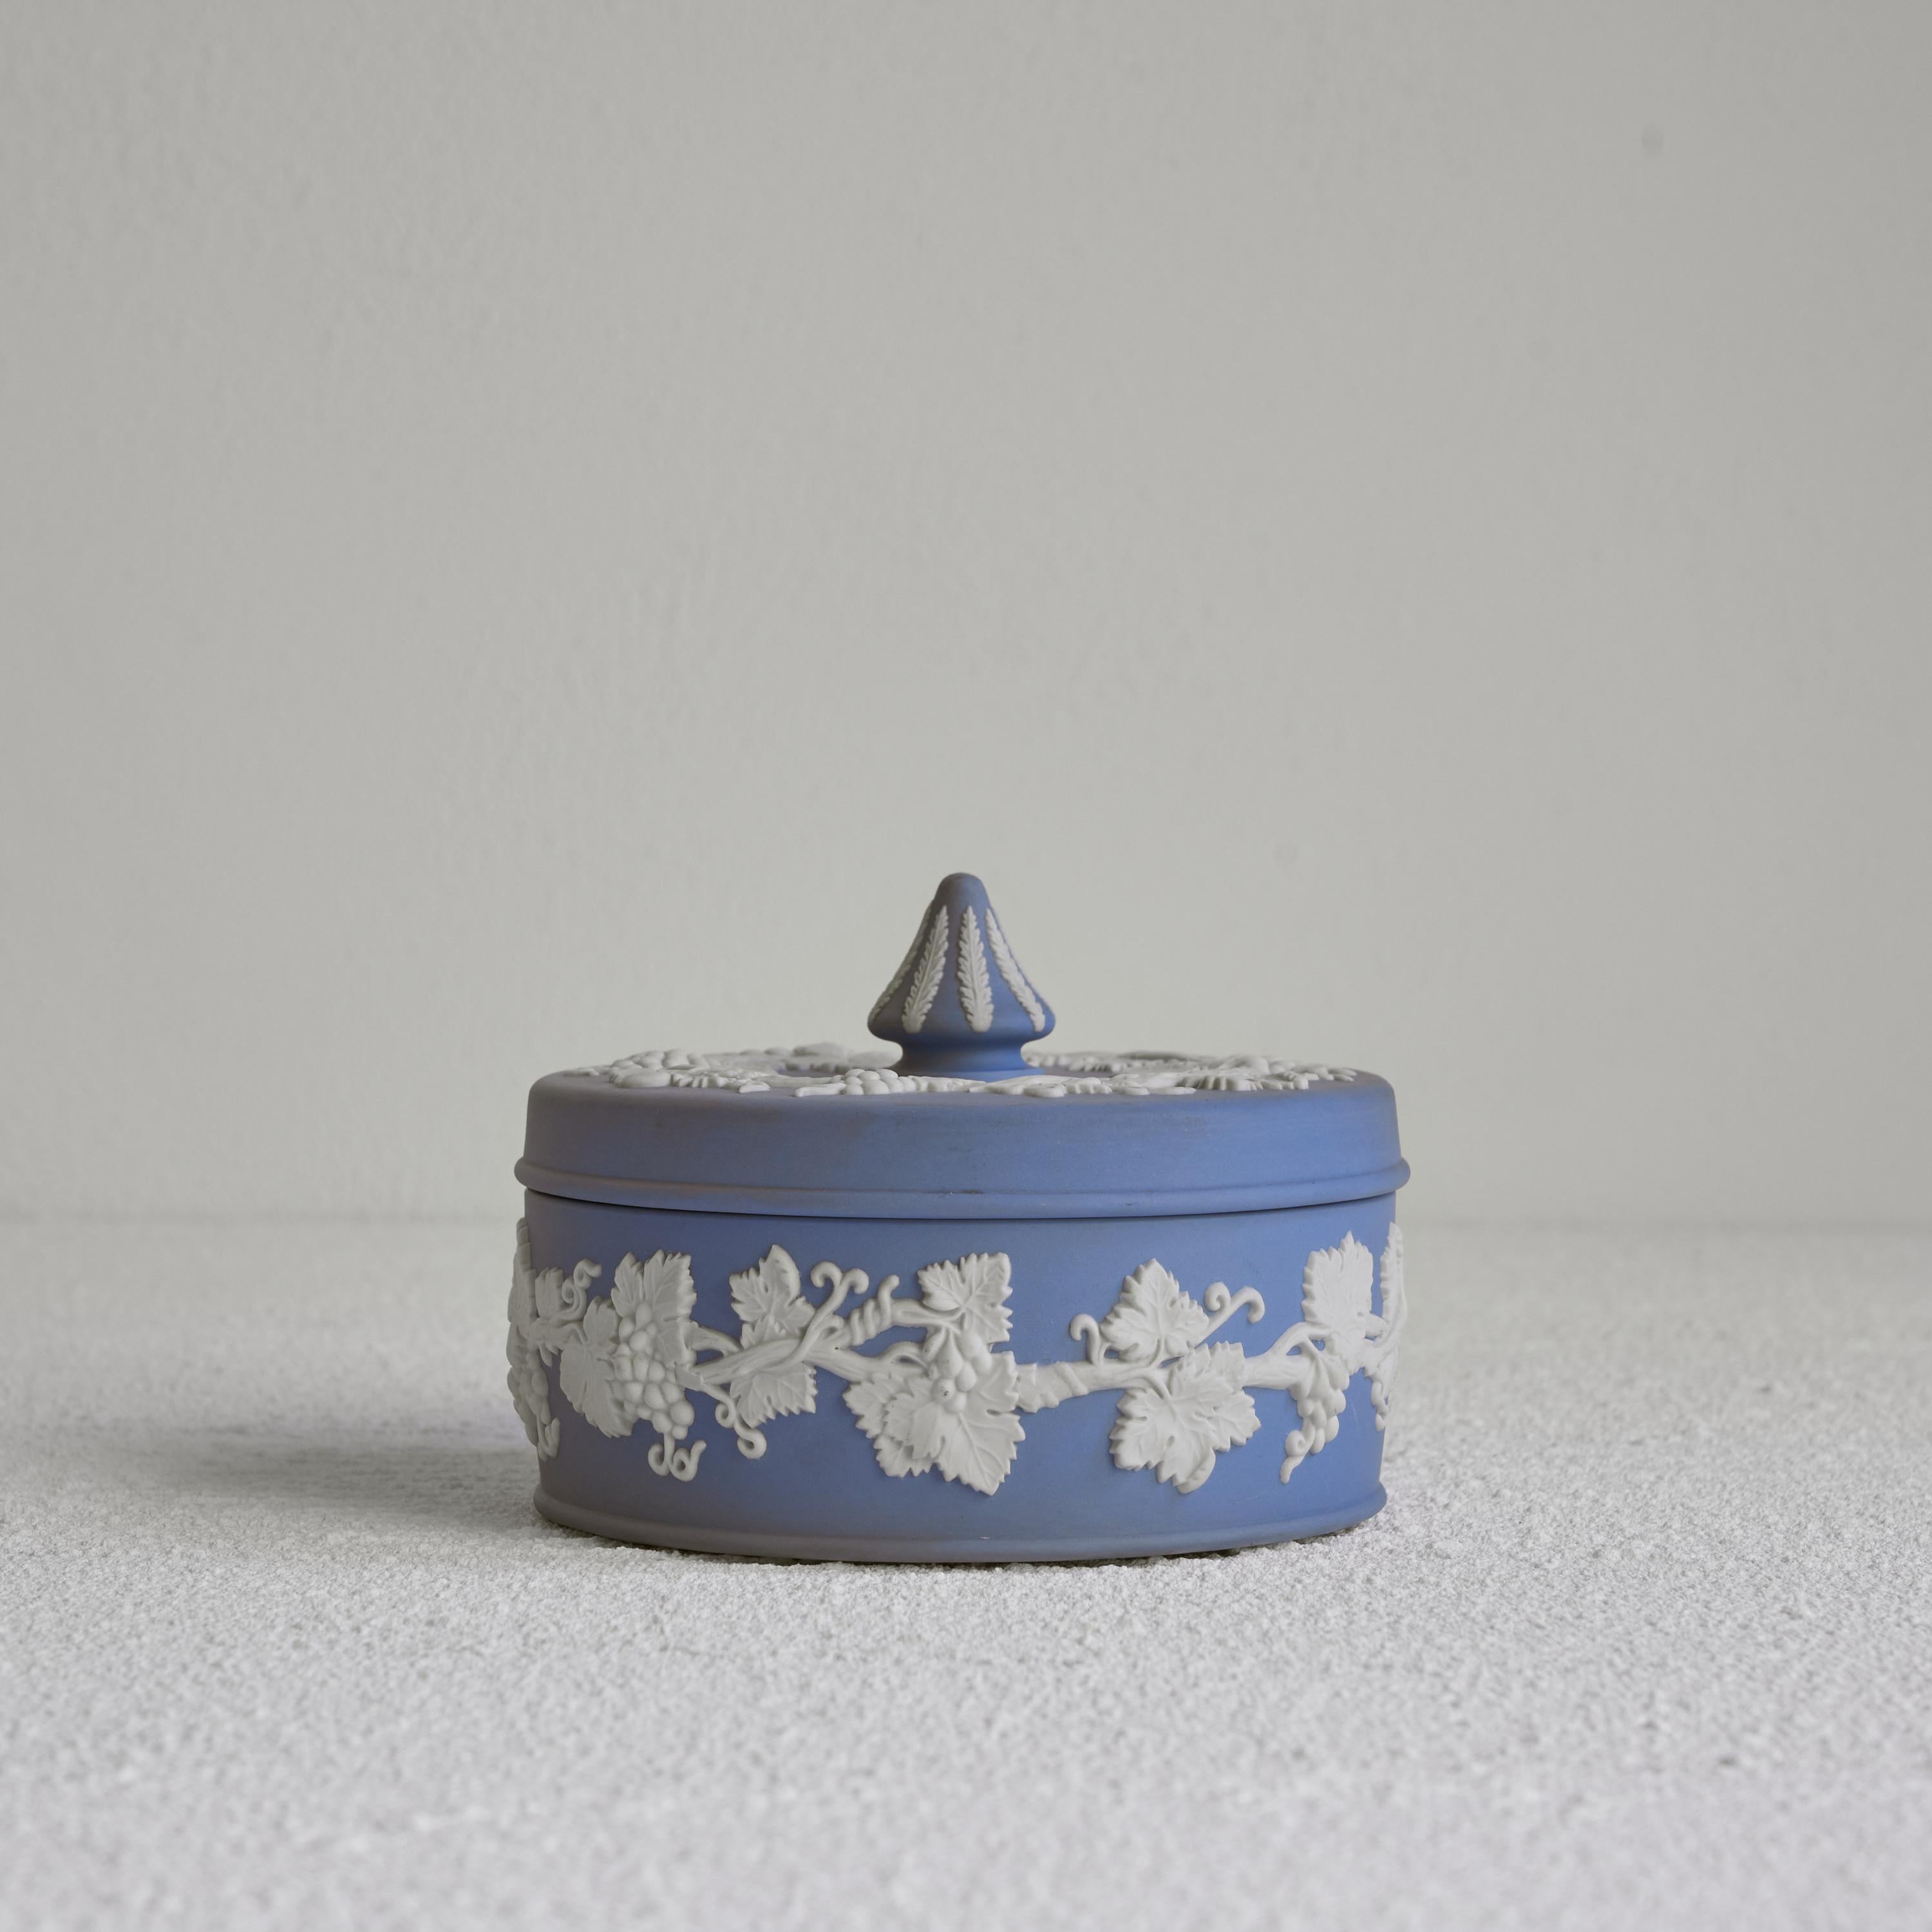 Wedgwood Jasperware Lidded box, England, 20th century.

This is a quintessential piece of Wedgwood Jasperware. Lidded box in the famous Jasperware blue and white decor. Neo-classical and elegant. Please note the beautiful white decoration with